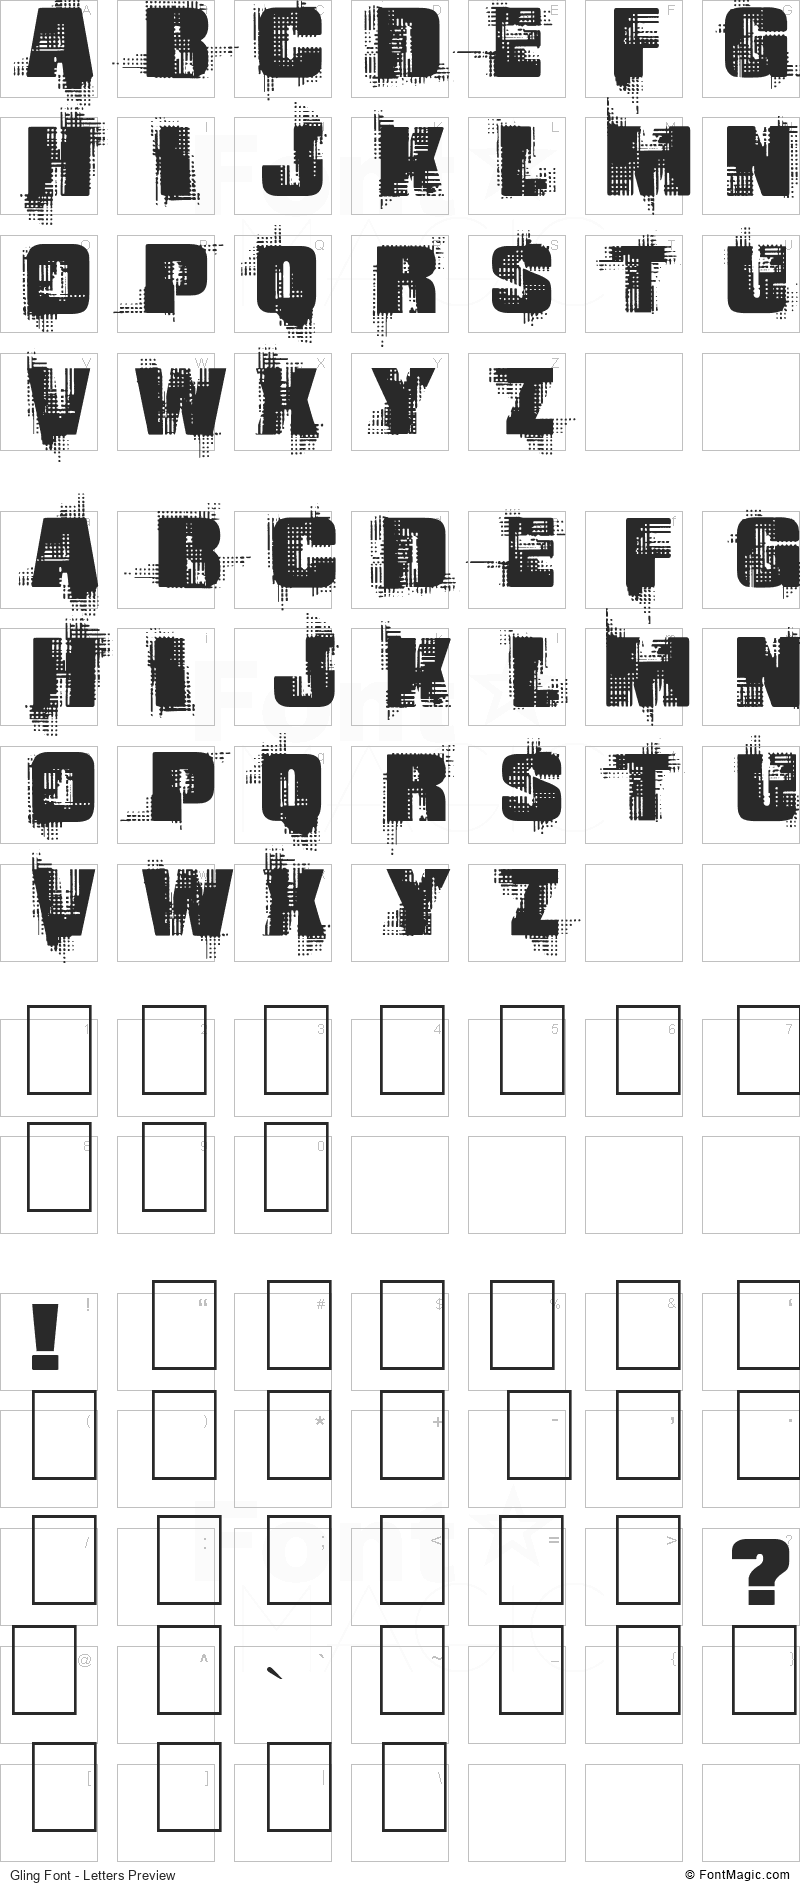 Gling Font - All Latters Preview Chart